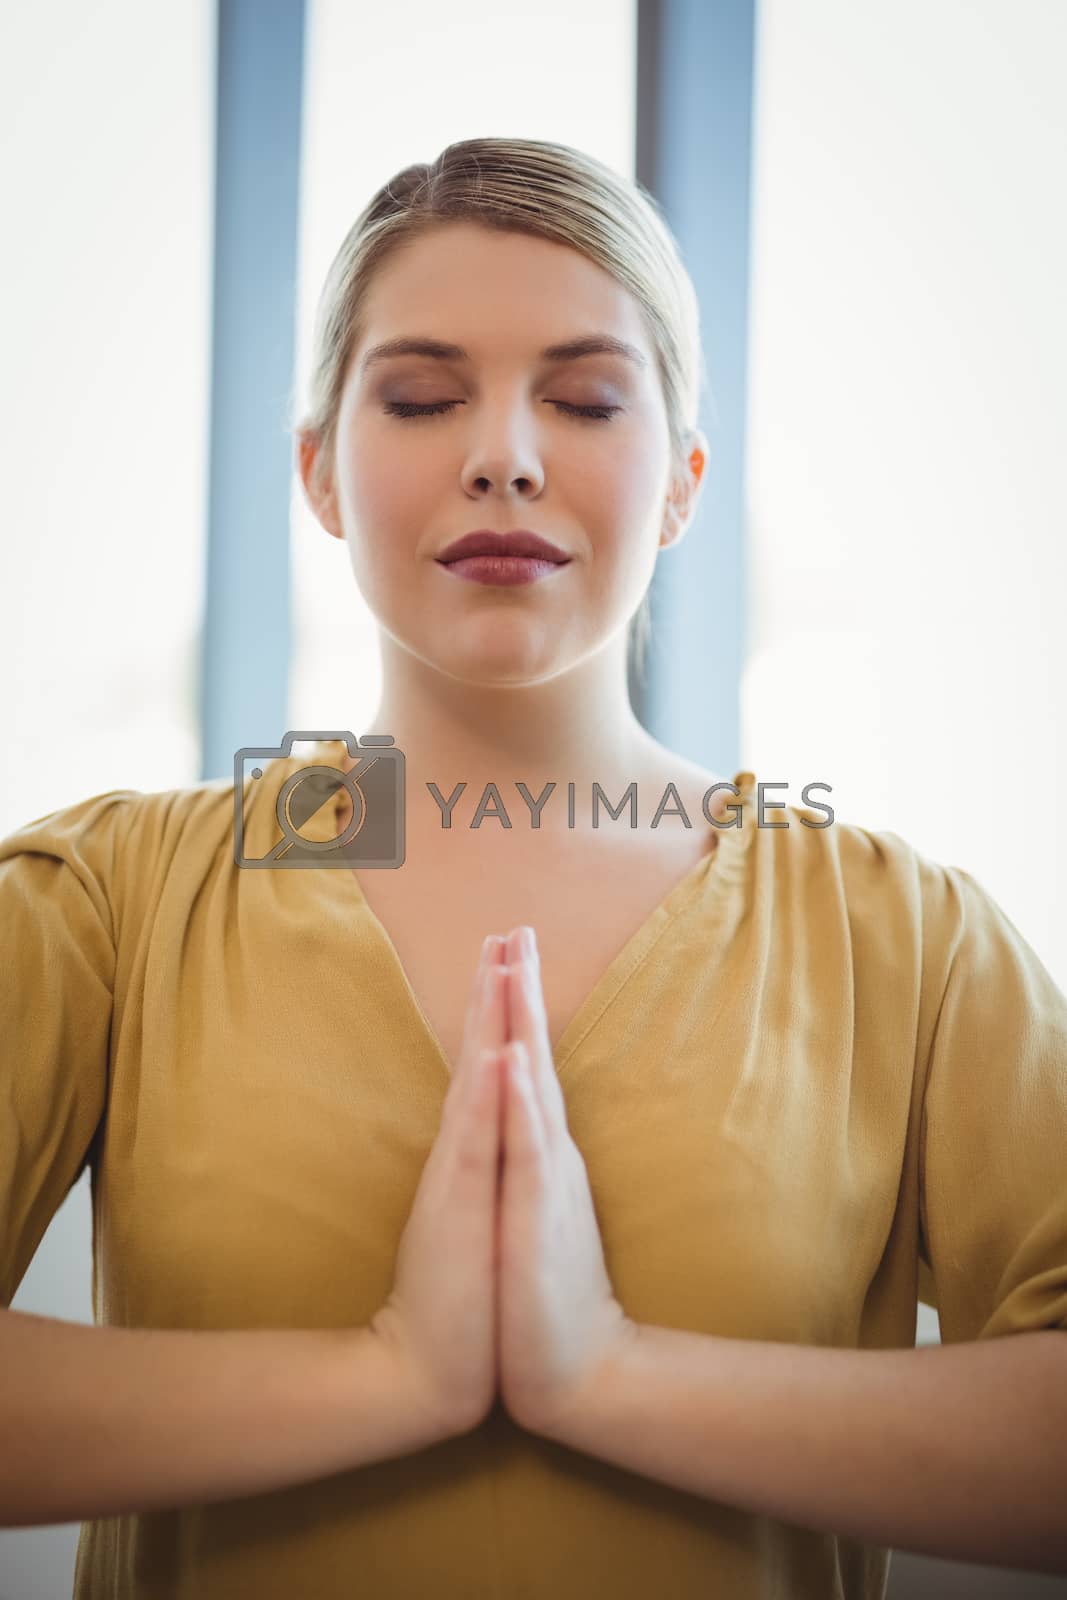 Royalty free image of Executive meditating in office by Wavebreakmedia